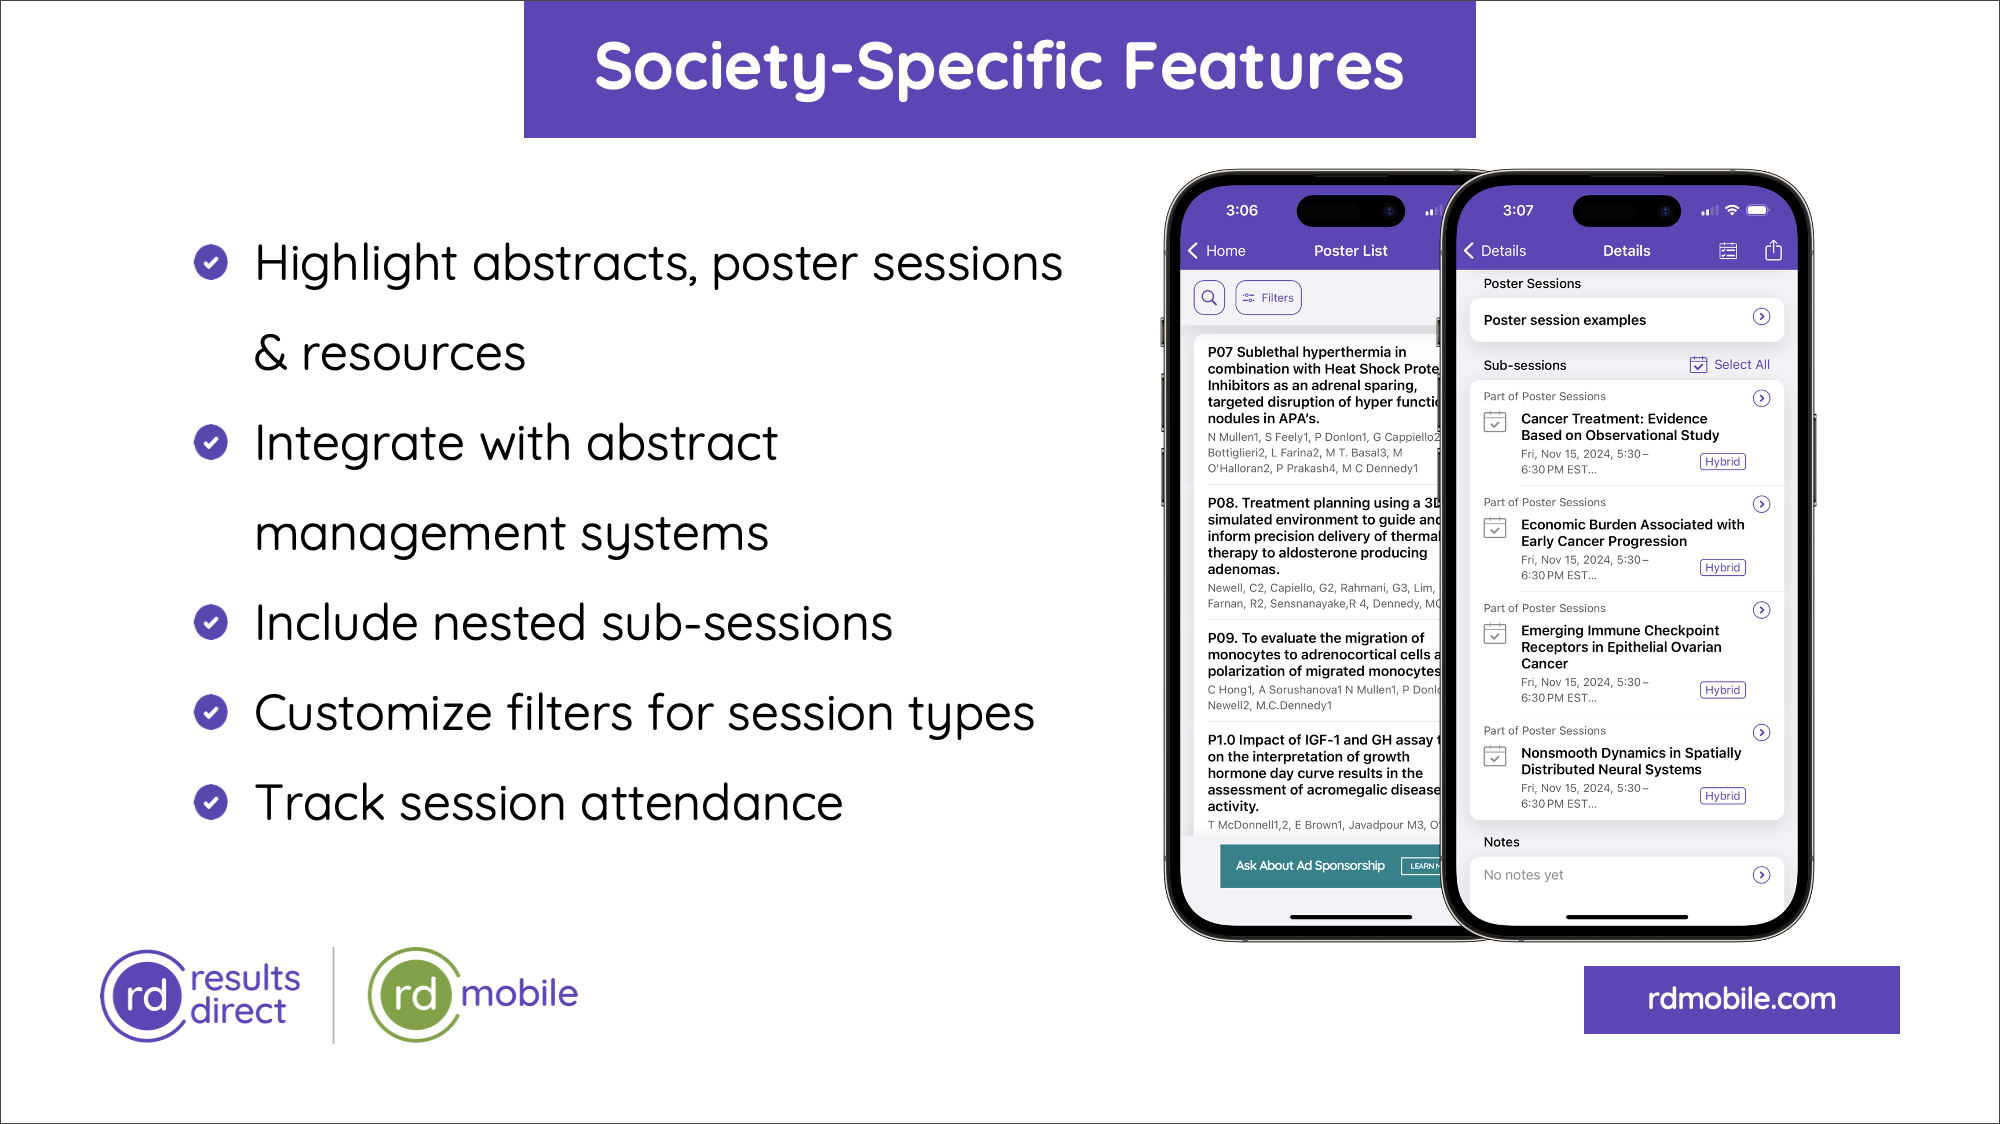 Society-Specific Features | Abstracts, Posters, Papers & Sub-Sessions